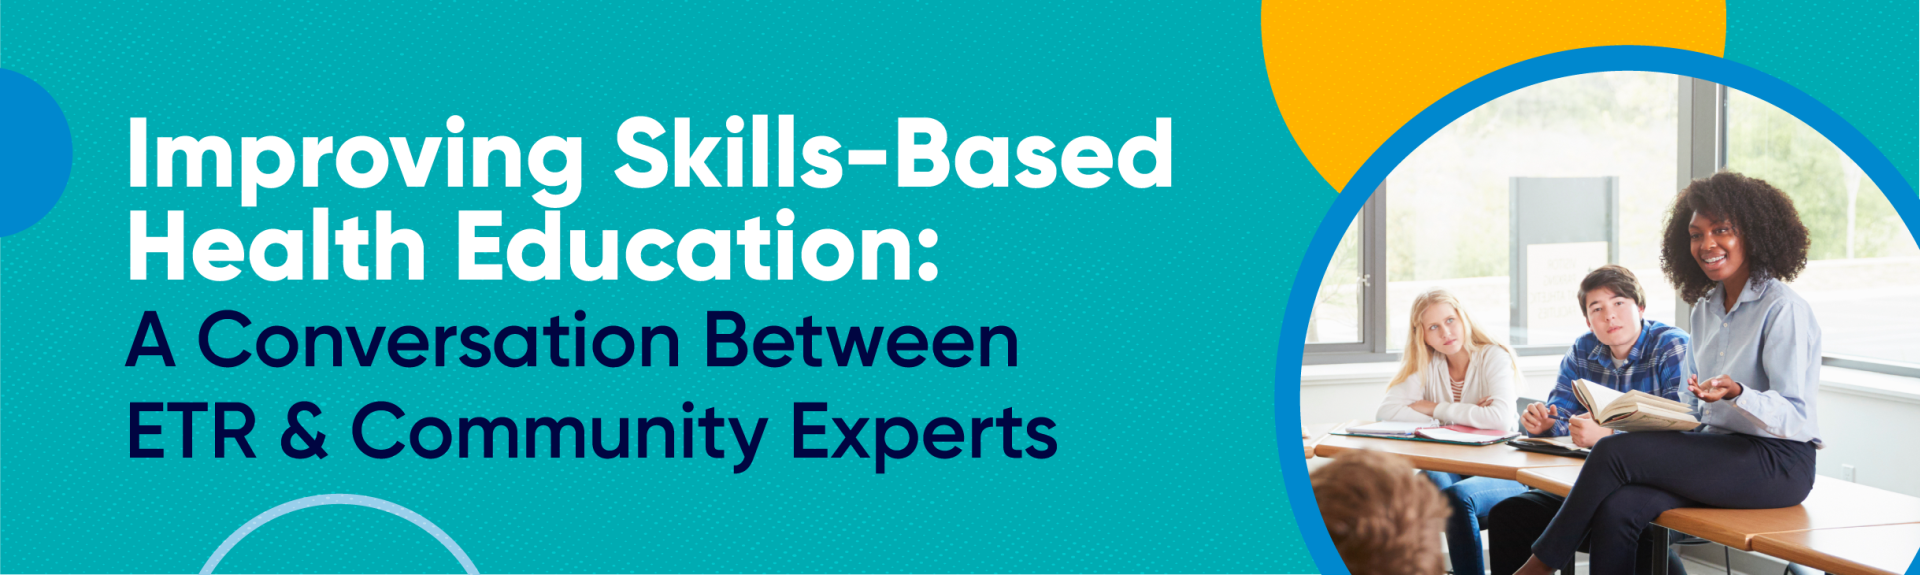 This is a teal graphic. On the left side of the graphic in white and black text it reads, "Improving Skills-Based Education: A Conversation Between ETR & Community Experts." On the right side of the graphic, is a an image of a teacher sitting on a desk talking to students. The image is in a circular frame. Scattered across the image are circle icons in blue, light blue, and yellow.